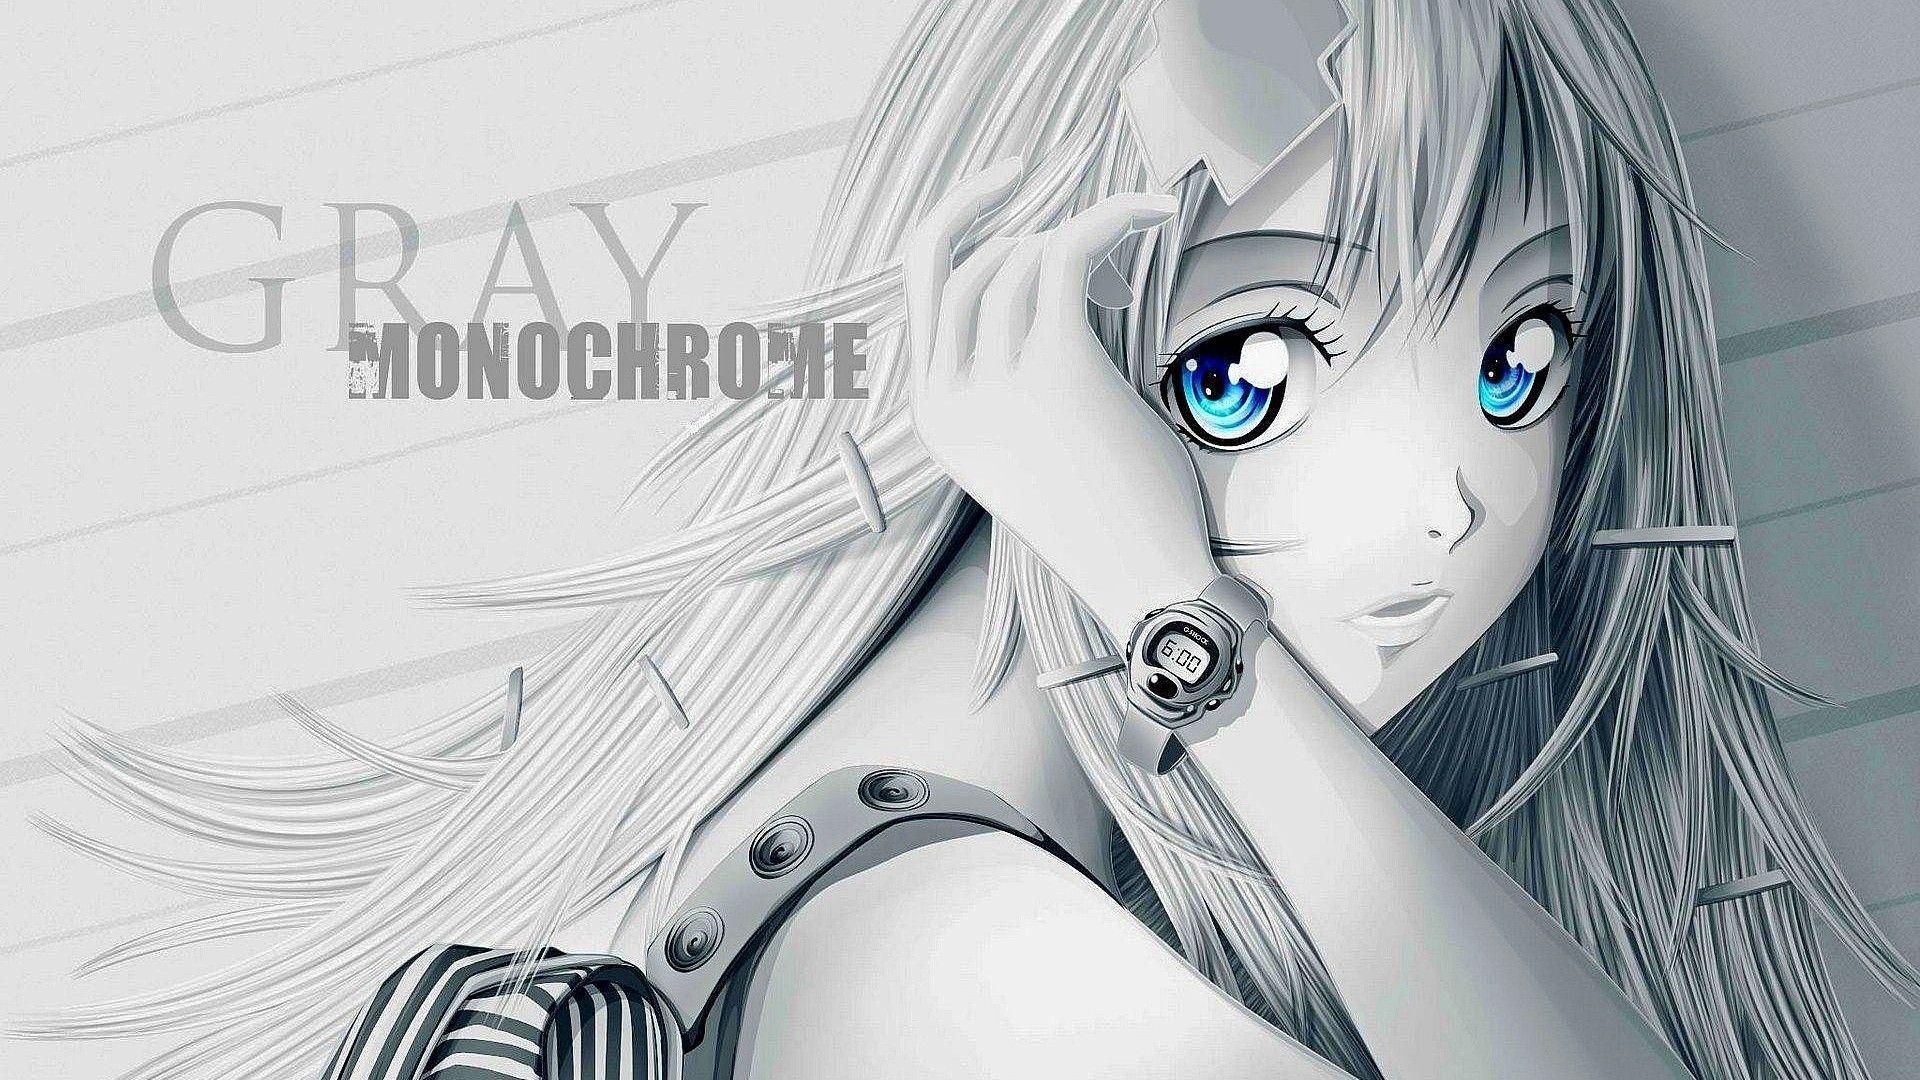 Cute Anime wallpaper HDDownload free stunning High Resolution